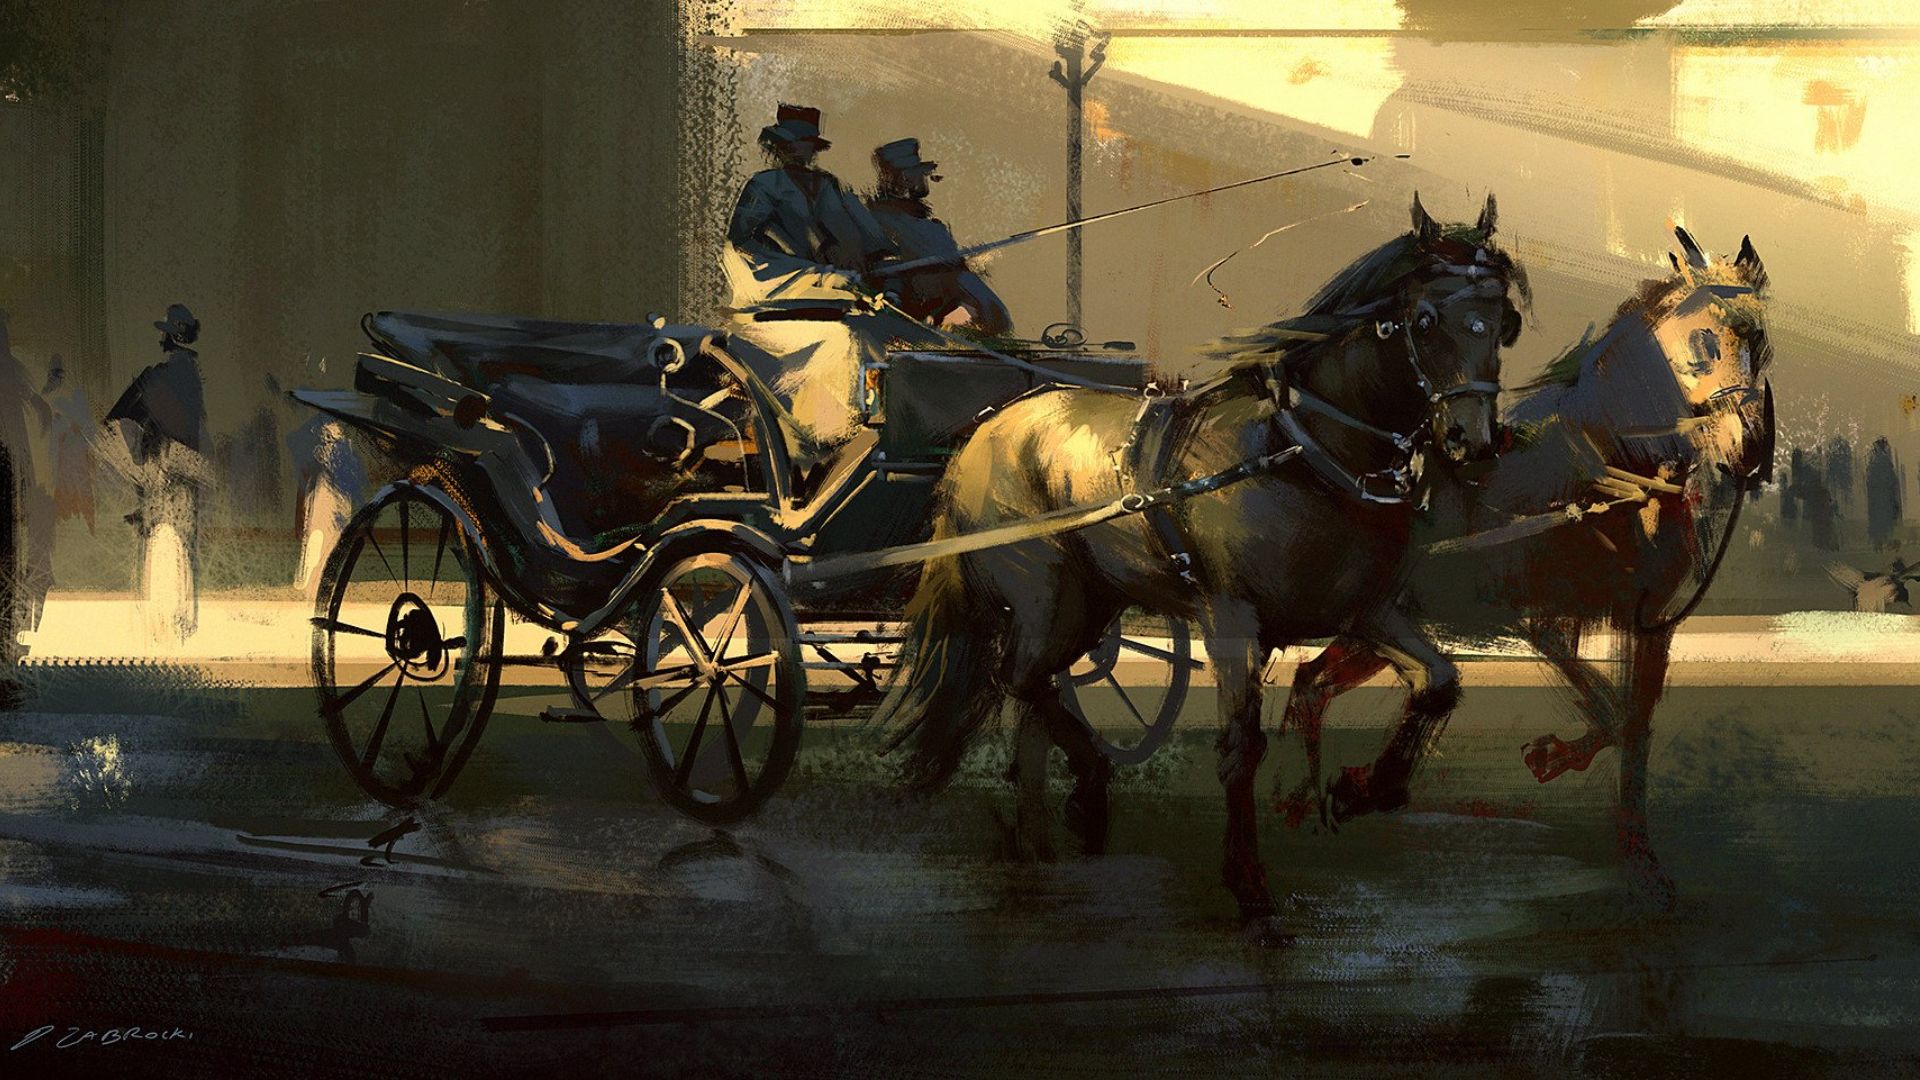 Free HD artistic, painting, carriage, horse drawn vehicle